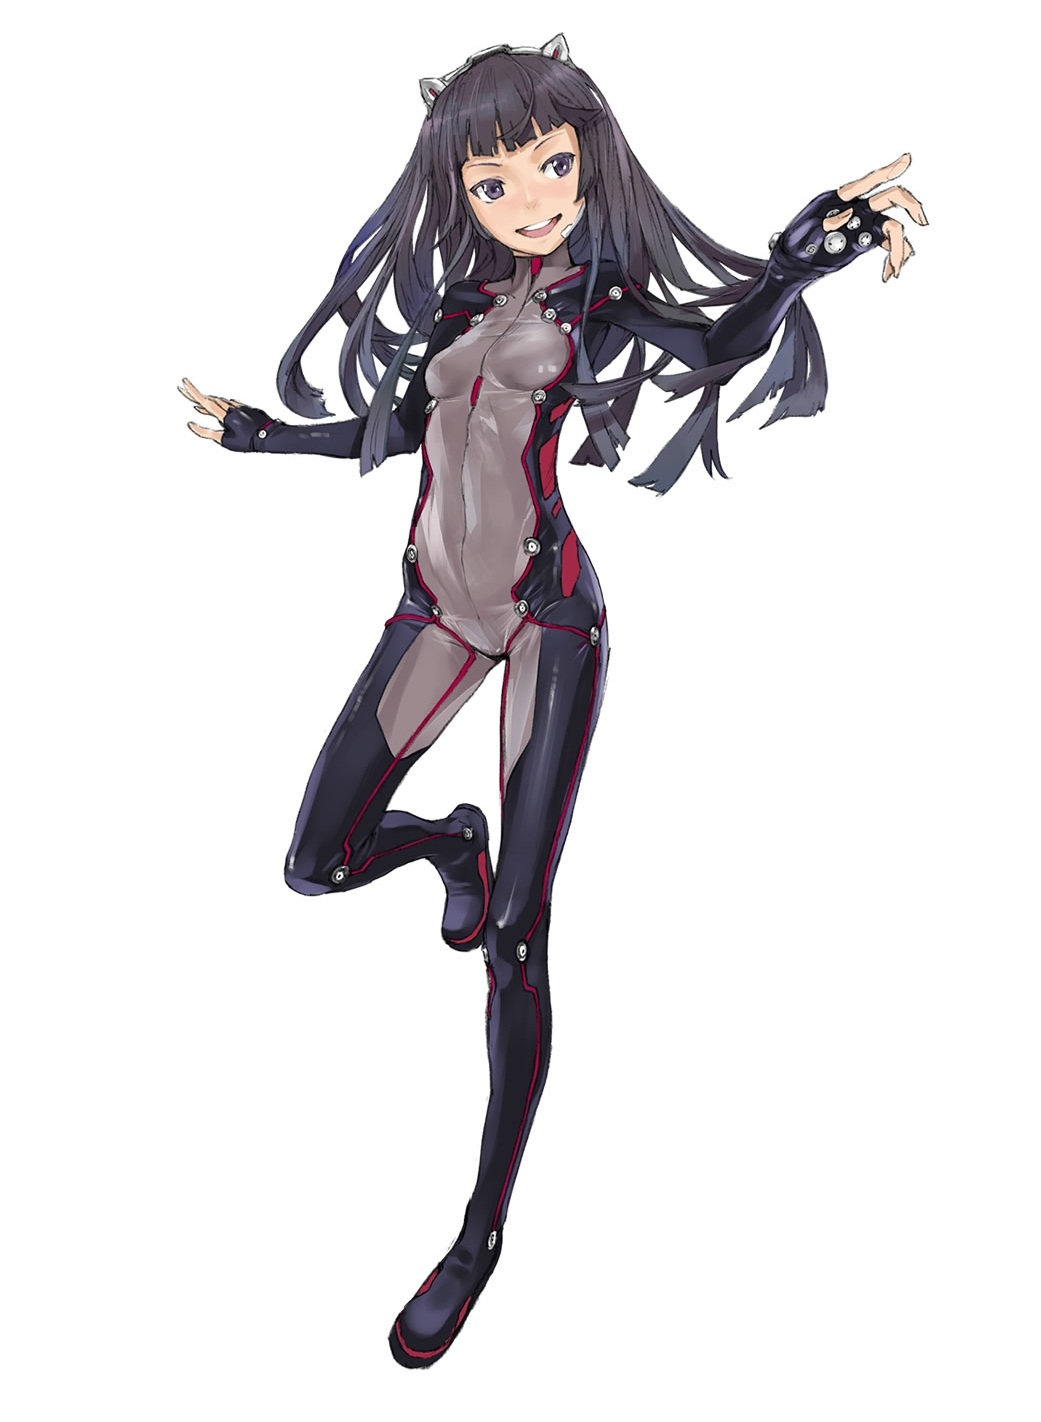 Tsugumi, Guilty, Crown, pictures, , , , , , 